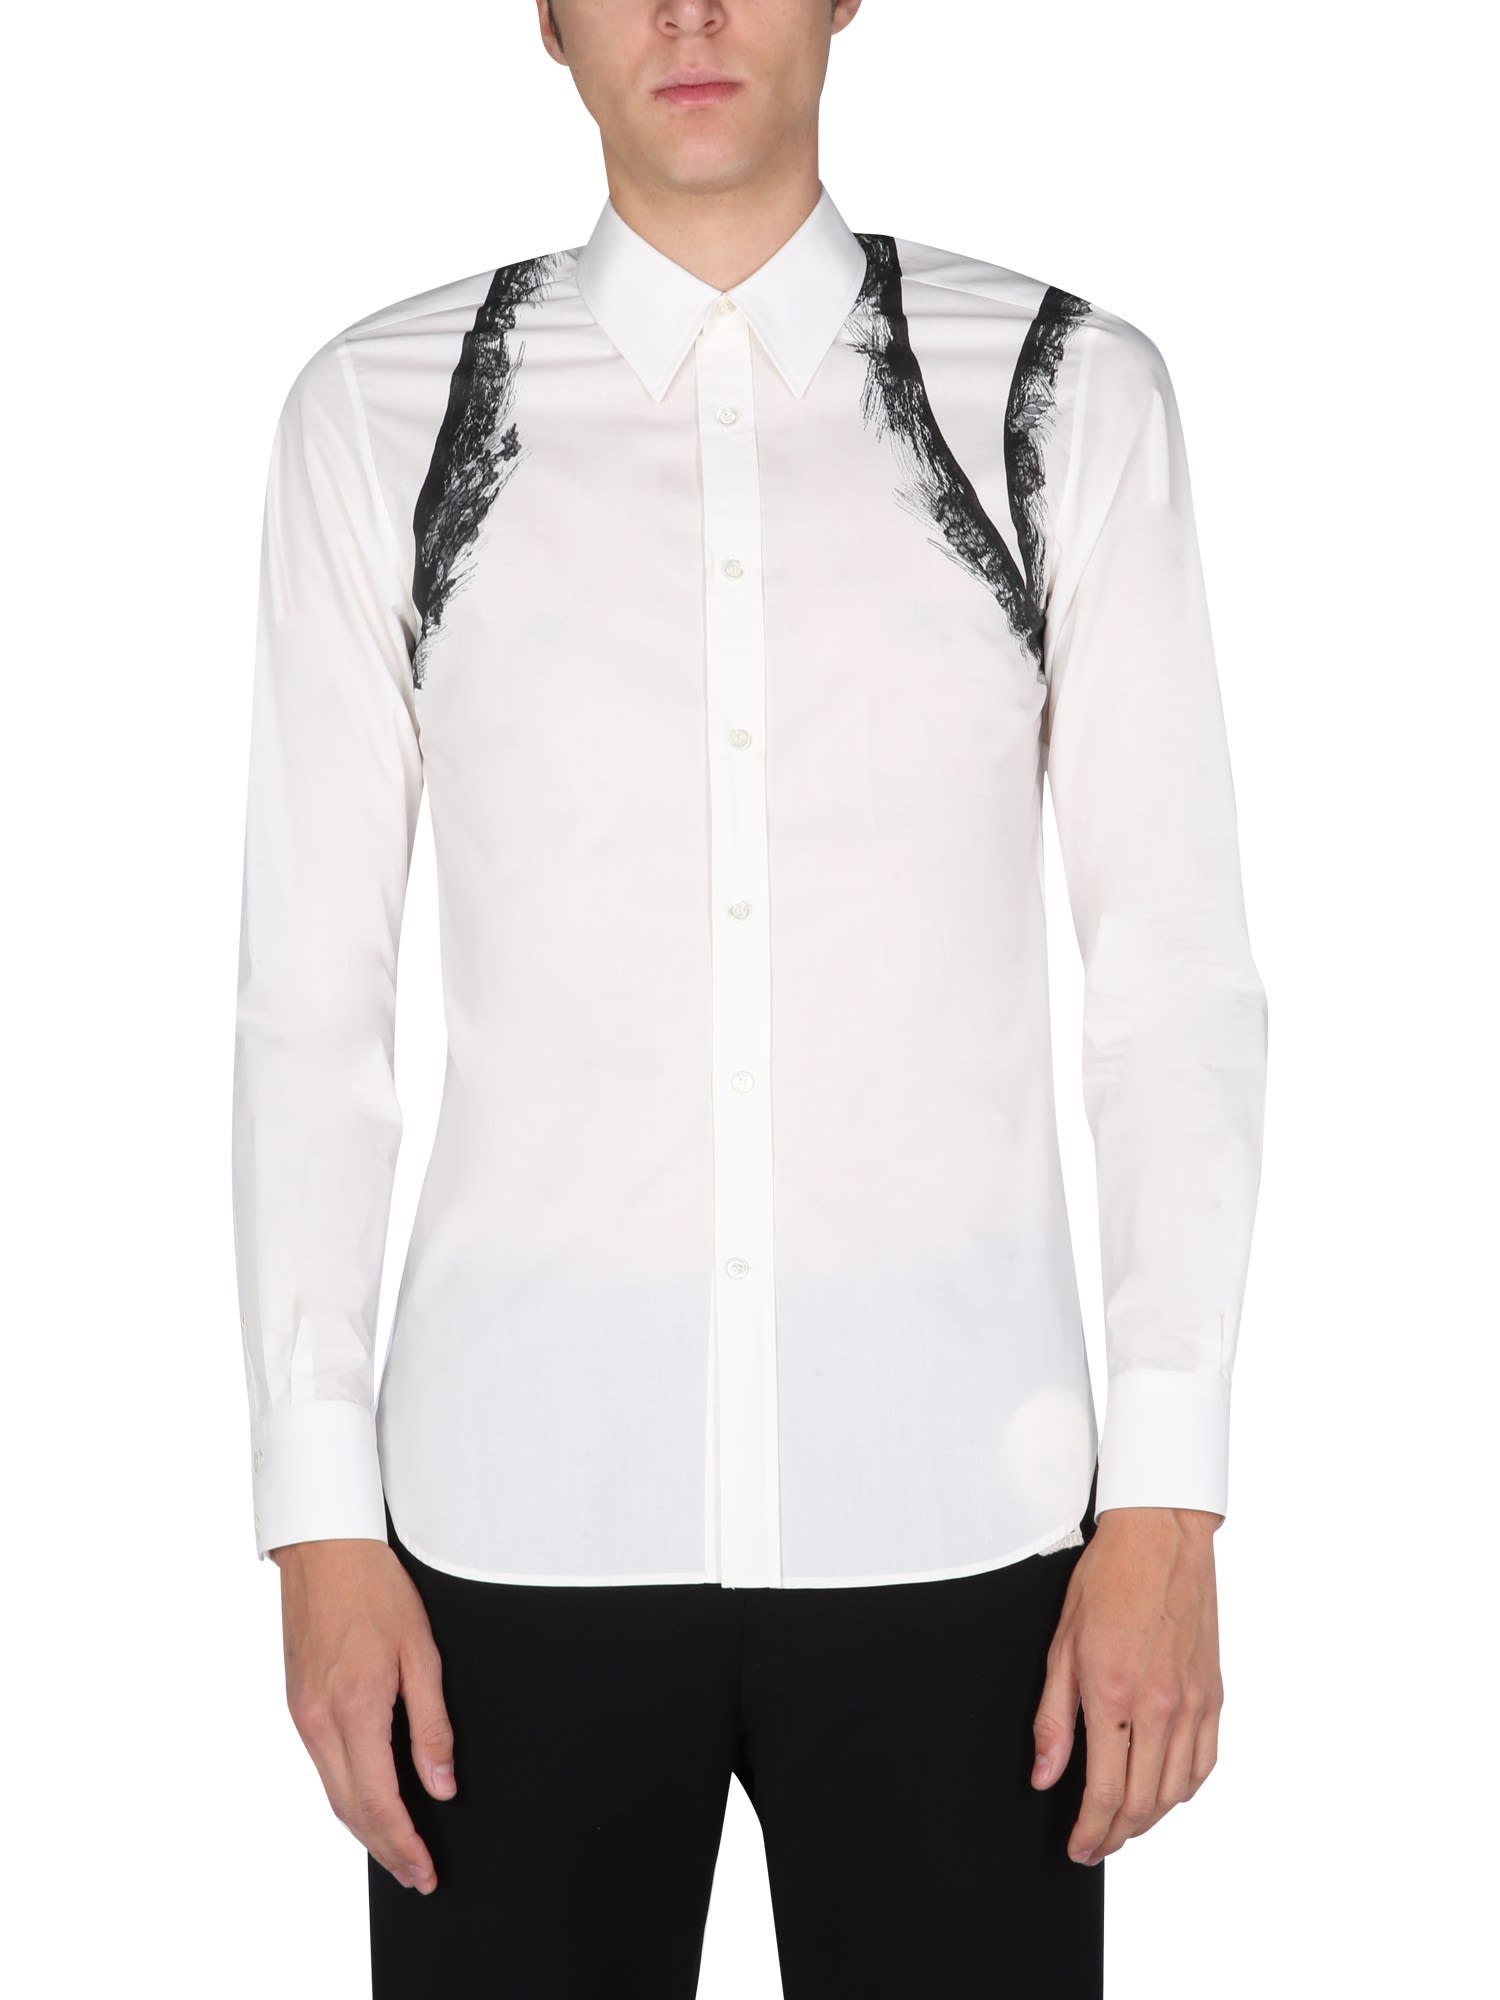 Alexander McQueen Shirt With Lace Print